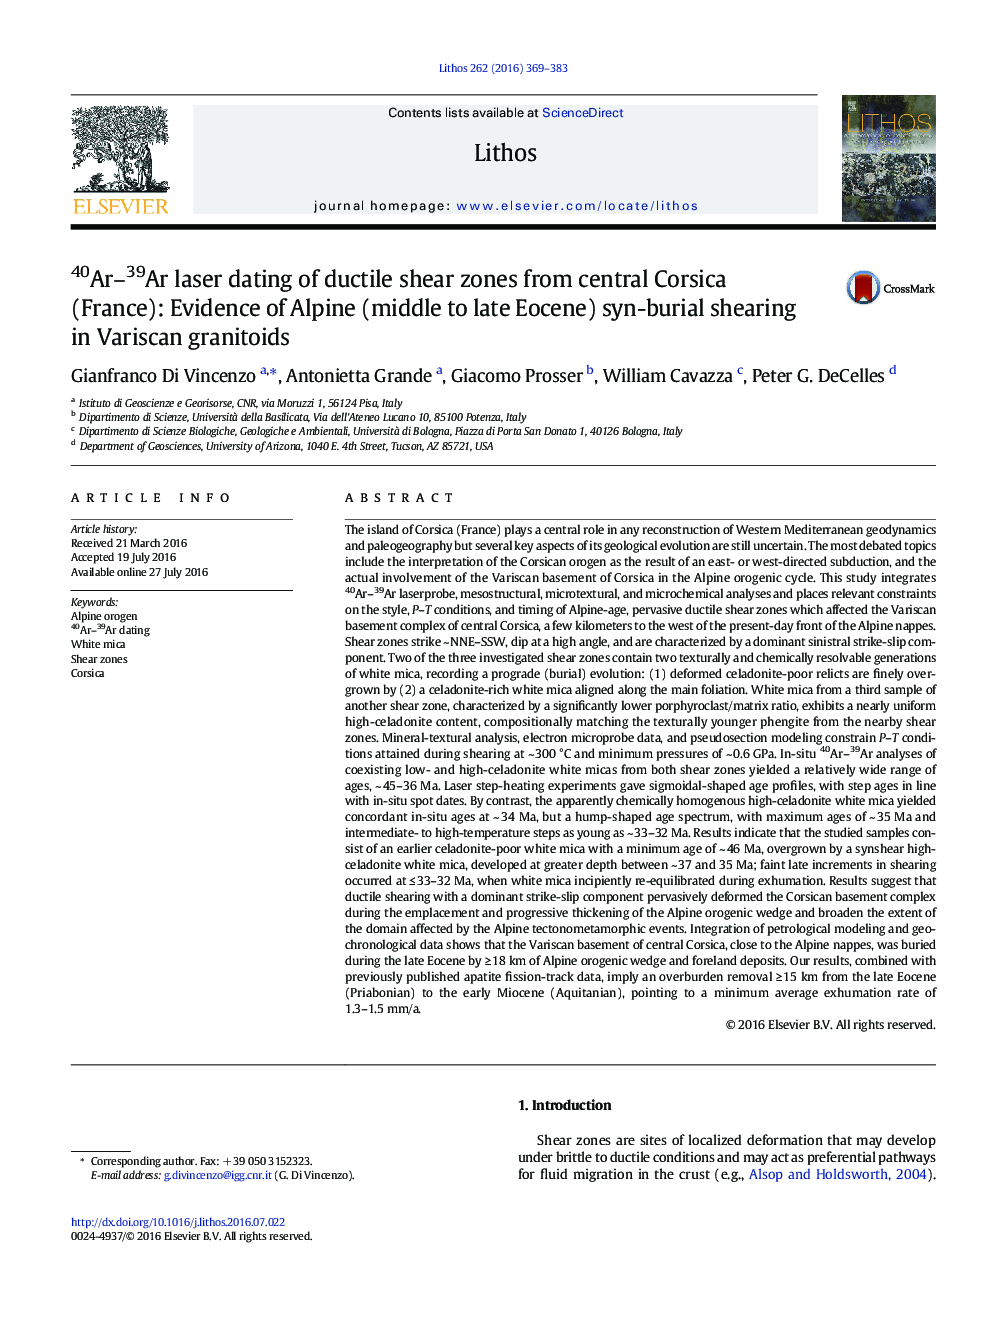 40Ar-39Ar laser dating of ductile shear zones from central Corsica (France): Evidence of Alpine (middle to late Eocene) syn-burial shearing in Variscan granitoids